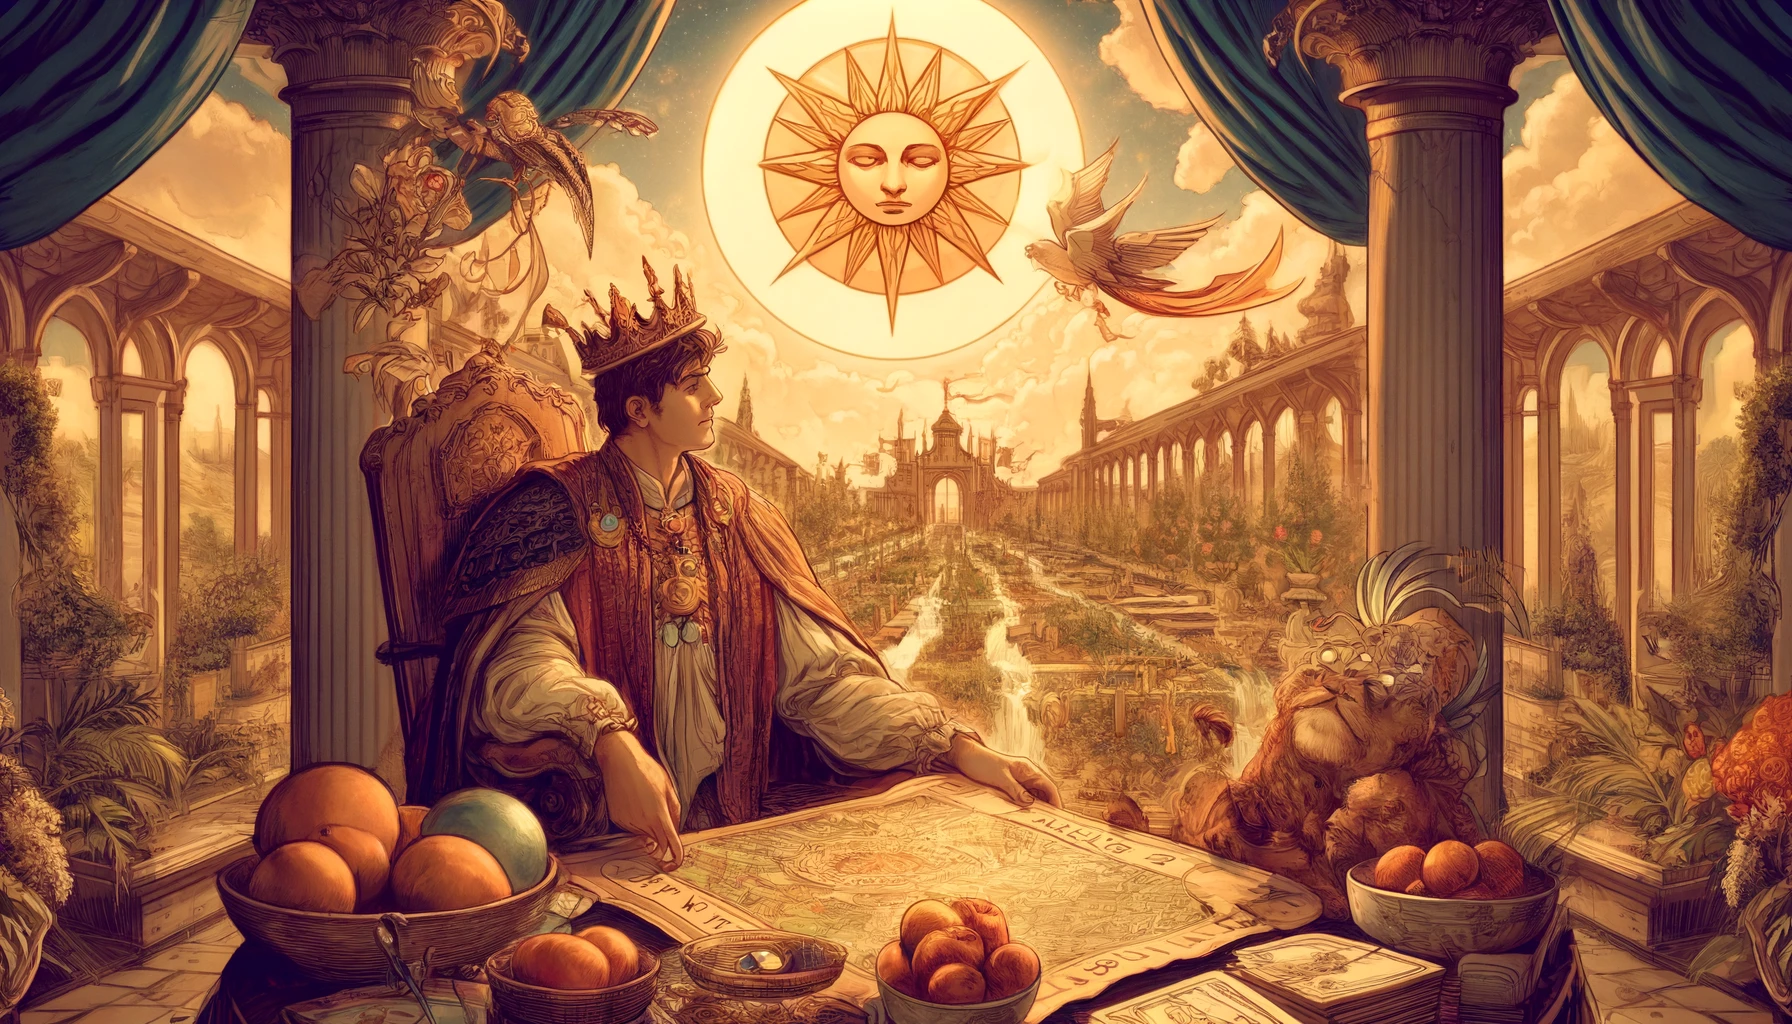 The image depicts the King of Pentacles seated confidently in a lush garden filled with blooming flowers and fruitful trees, symbolizing abundance and prosperity. The King exudes a sense of ambition and fulfillment as he gazes ahead with determination. This visual provides a rich and inviting context for the discussion on aspirations and desires associated with the King of Pentacles in tarot readings.